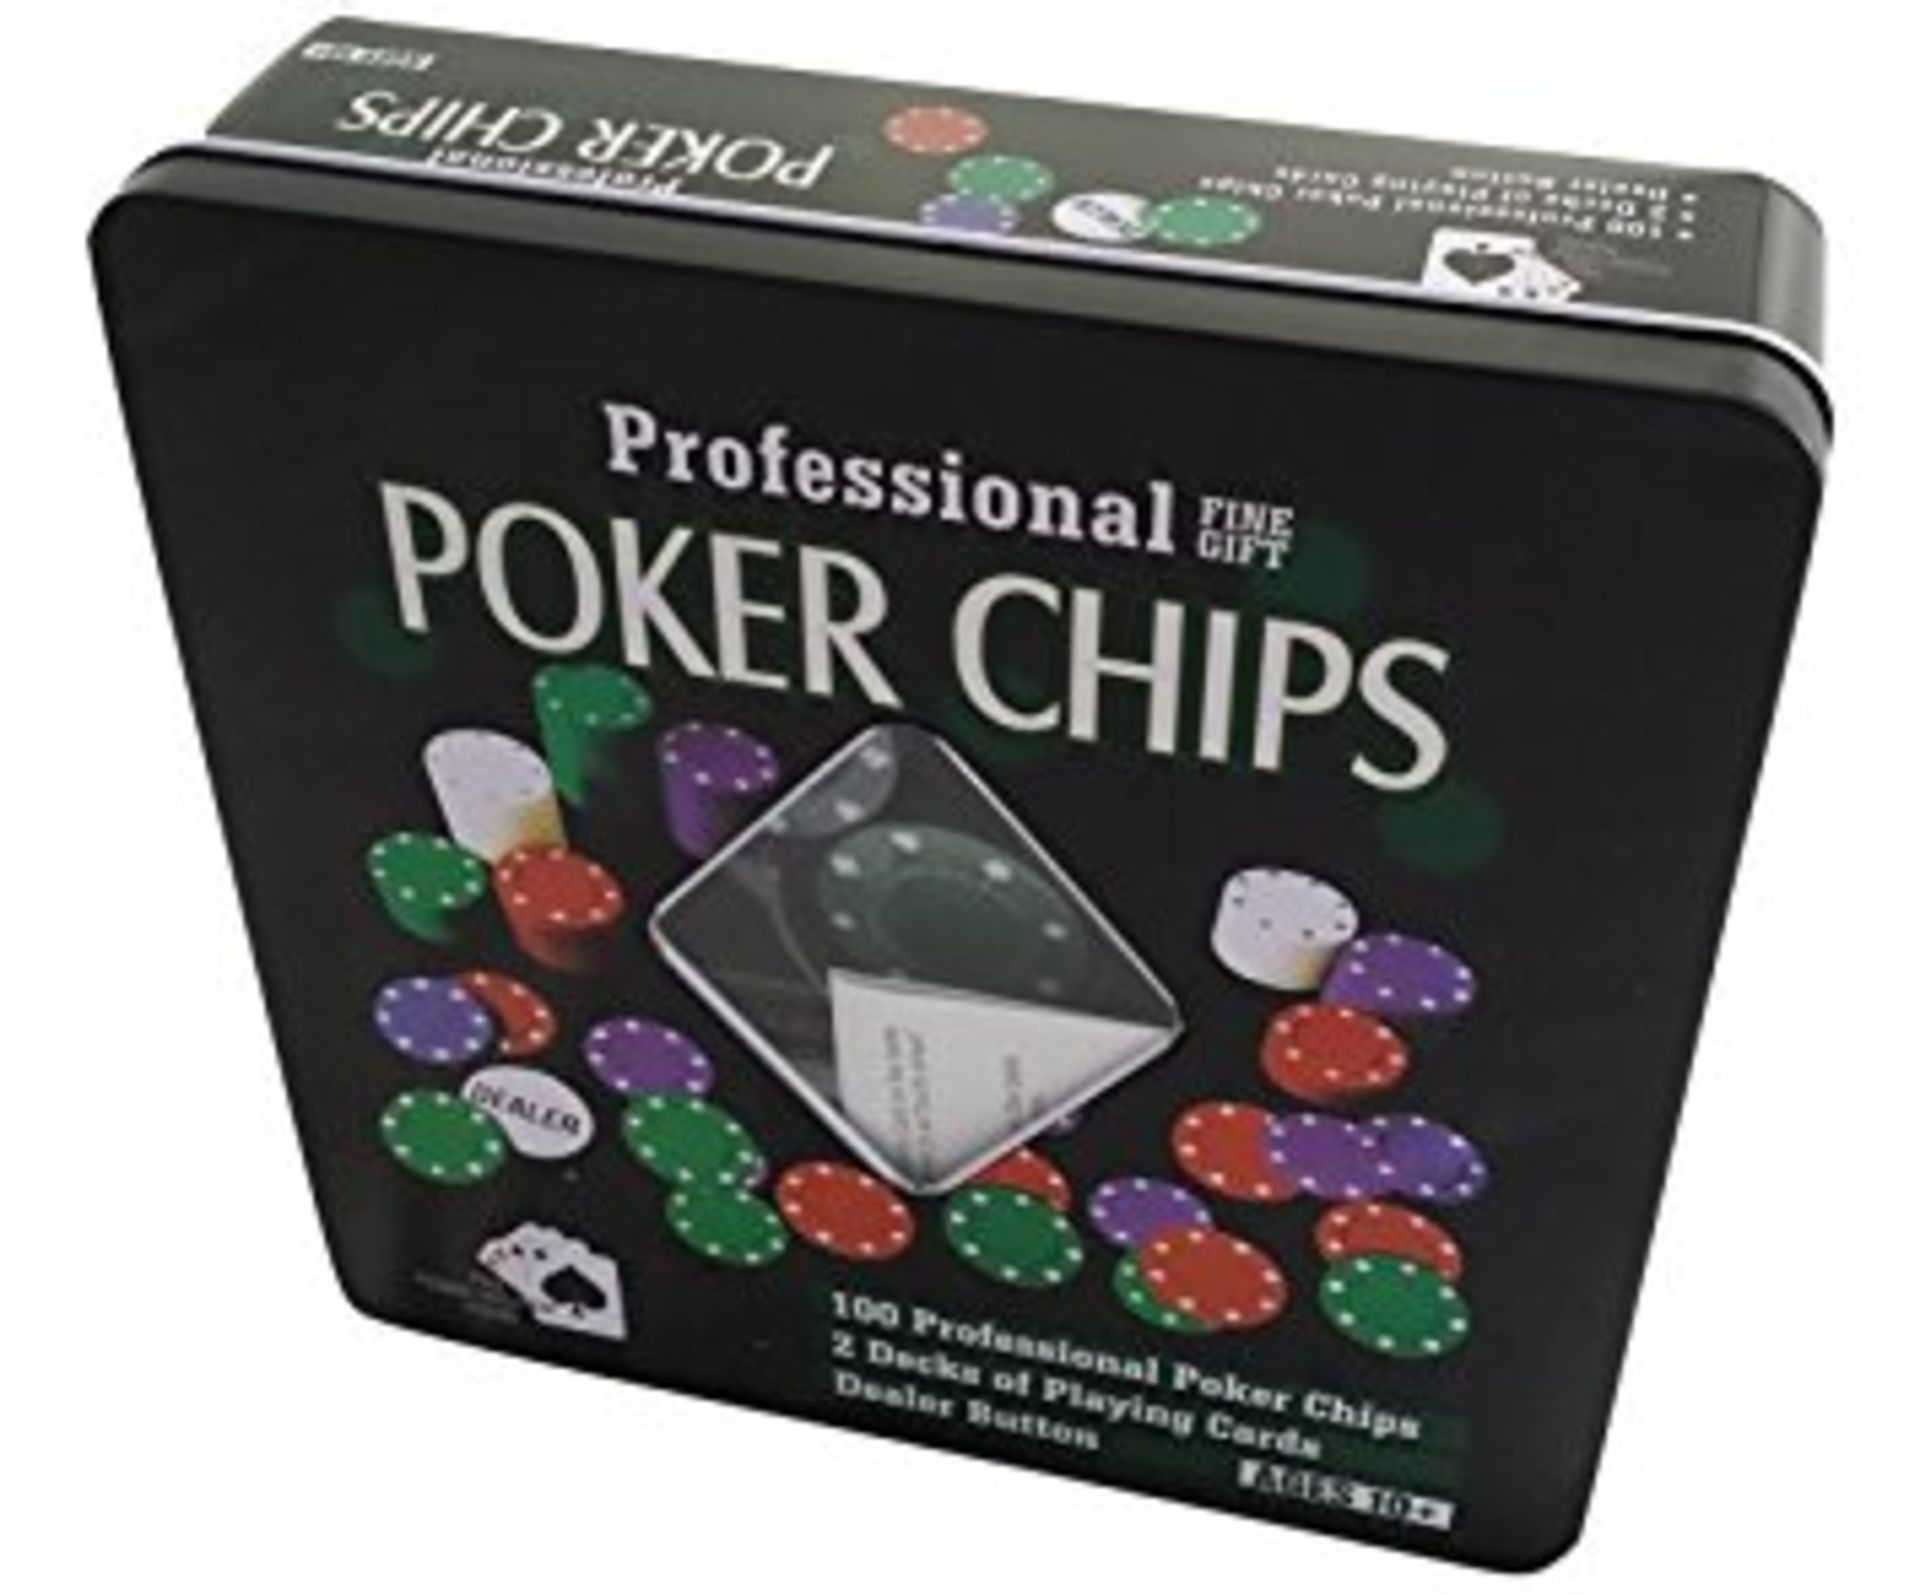 V Brand New Professional Poker Chips With 100 Poker Chips - 2 Decks Of Playing Cards And A Dealer